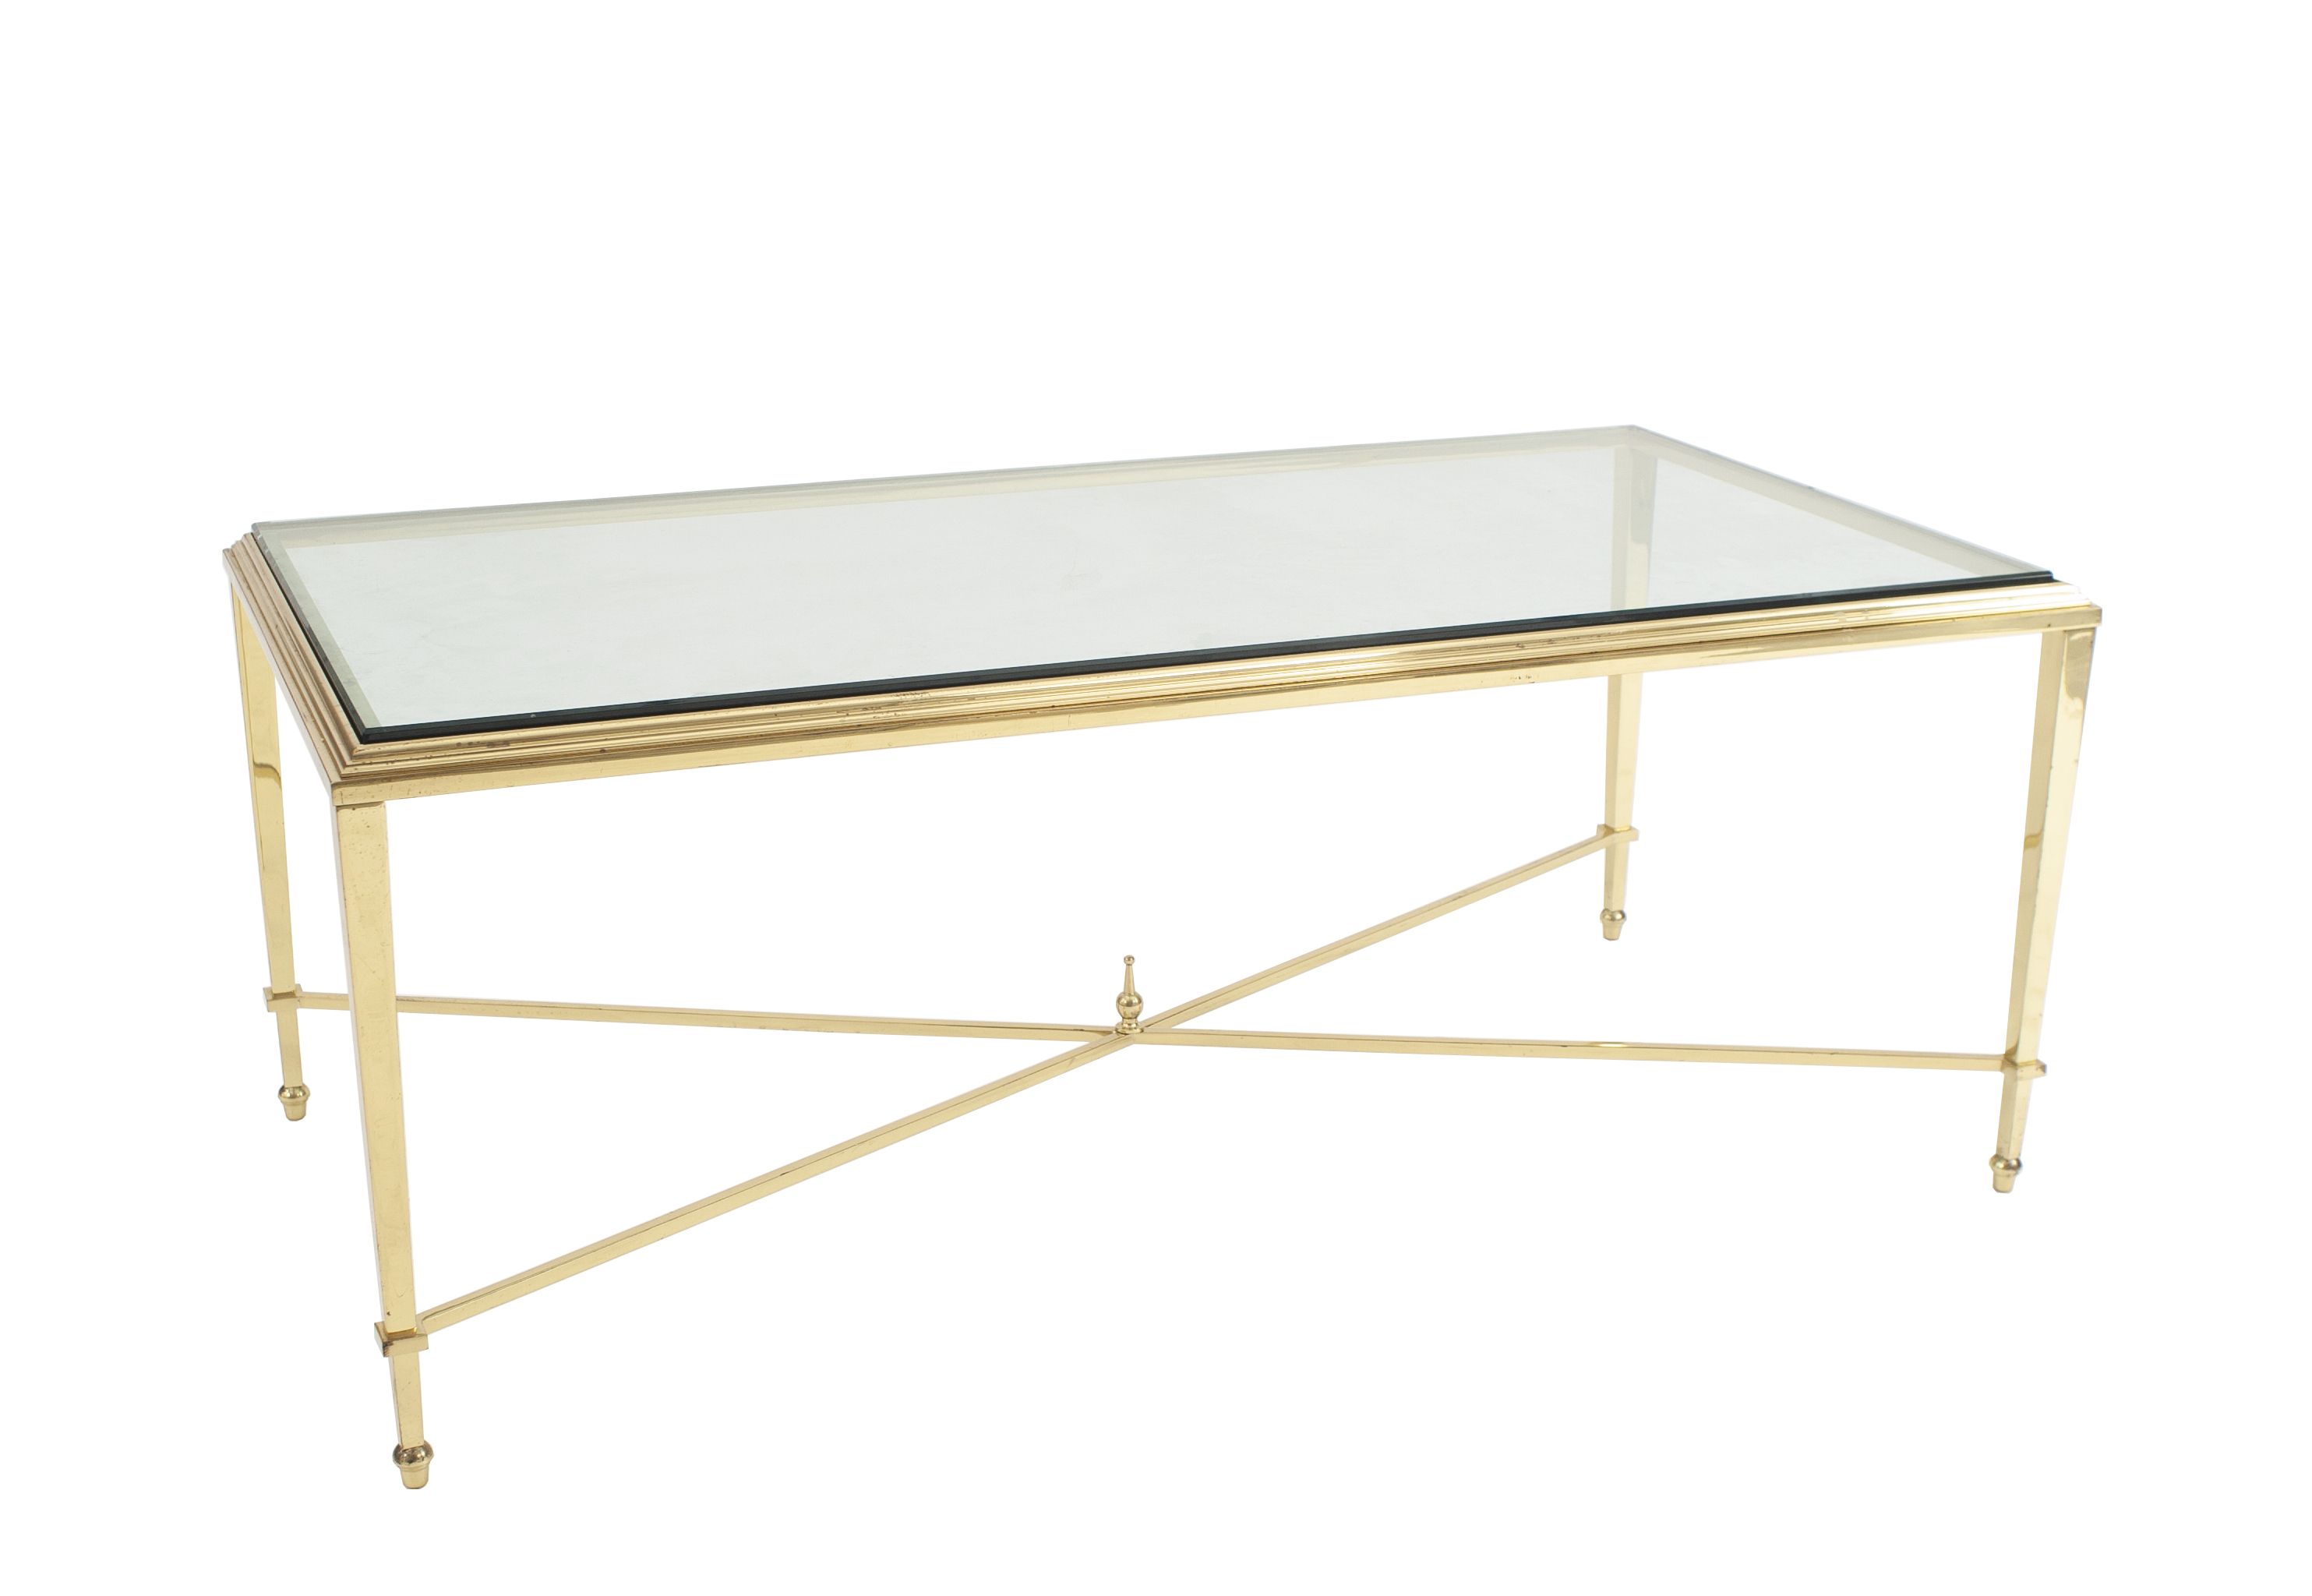 Well Known Contemporary Brass Rectangular Coffee Table With A Tiered Edge And Within Rectangular Coffee Tables With Brass Legs (View 6 of 20)